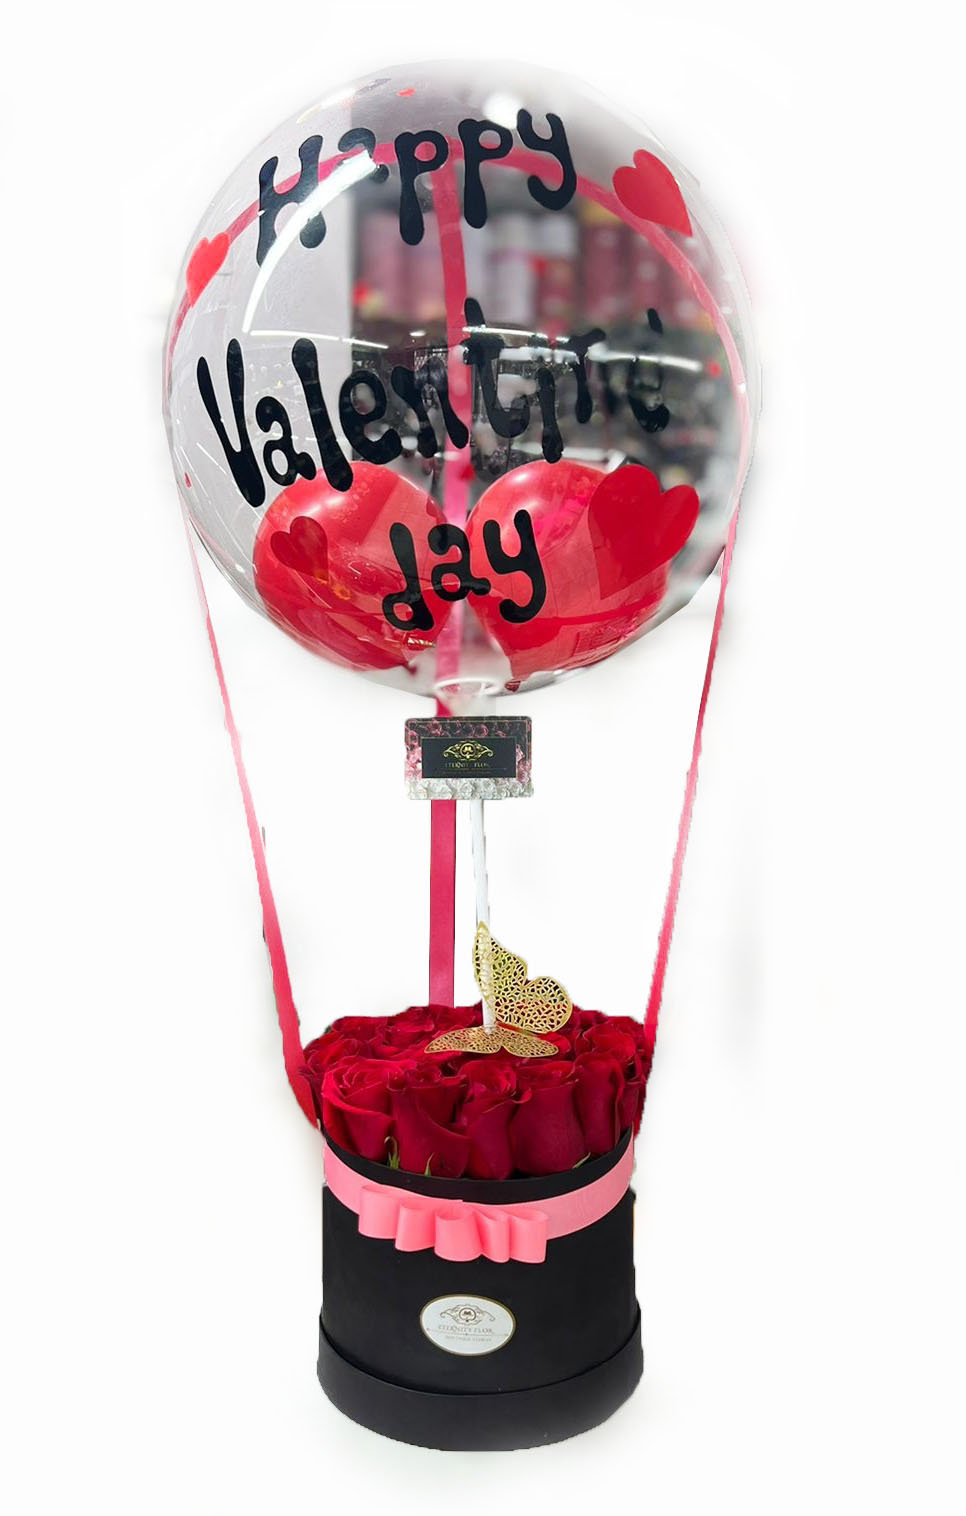 Personalized Rose Round Box and Balloon